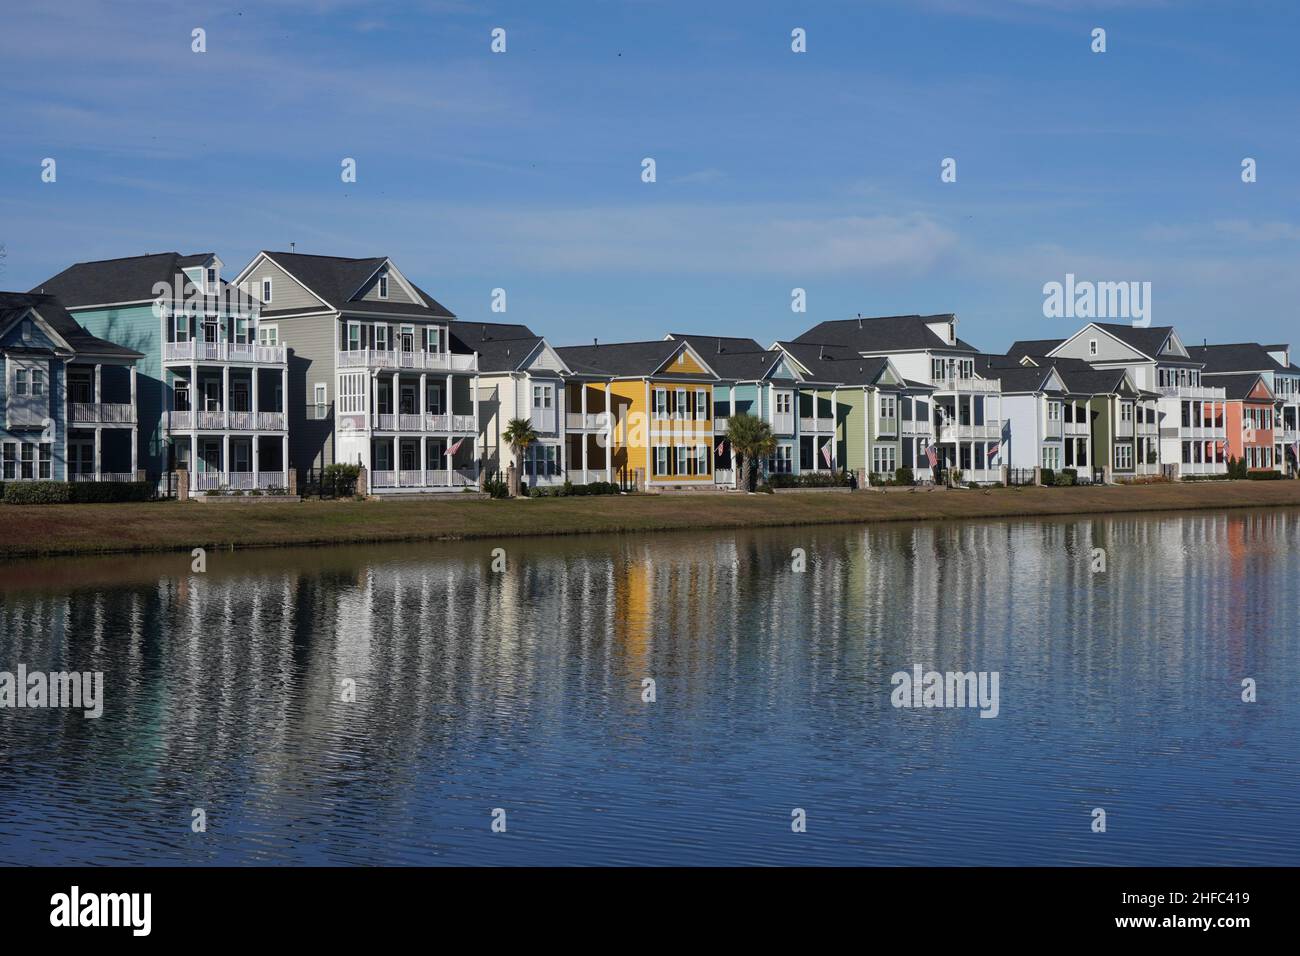 Row of Colorful Houses Reflecting in a Pond in a Surban Neighborhood. in South Carolina. Stock Photo